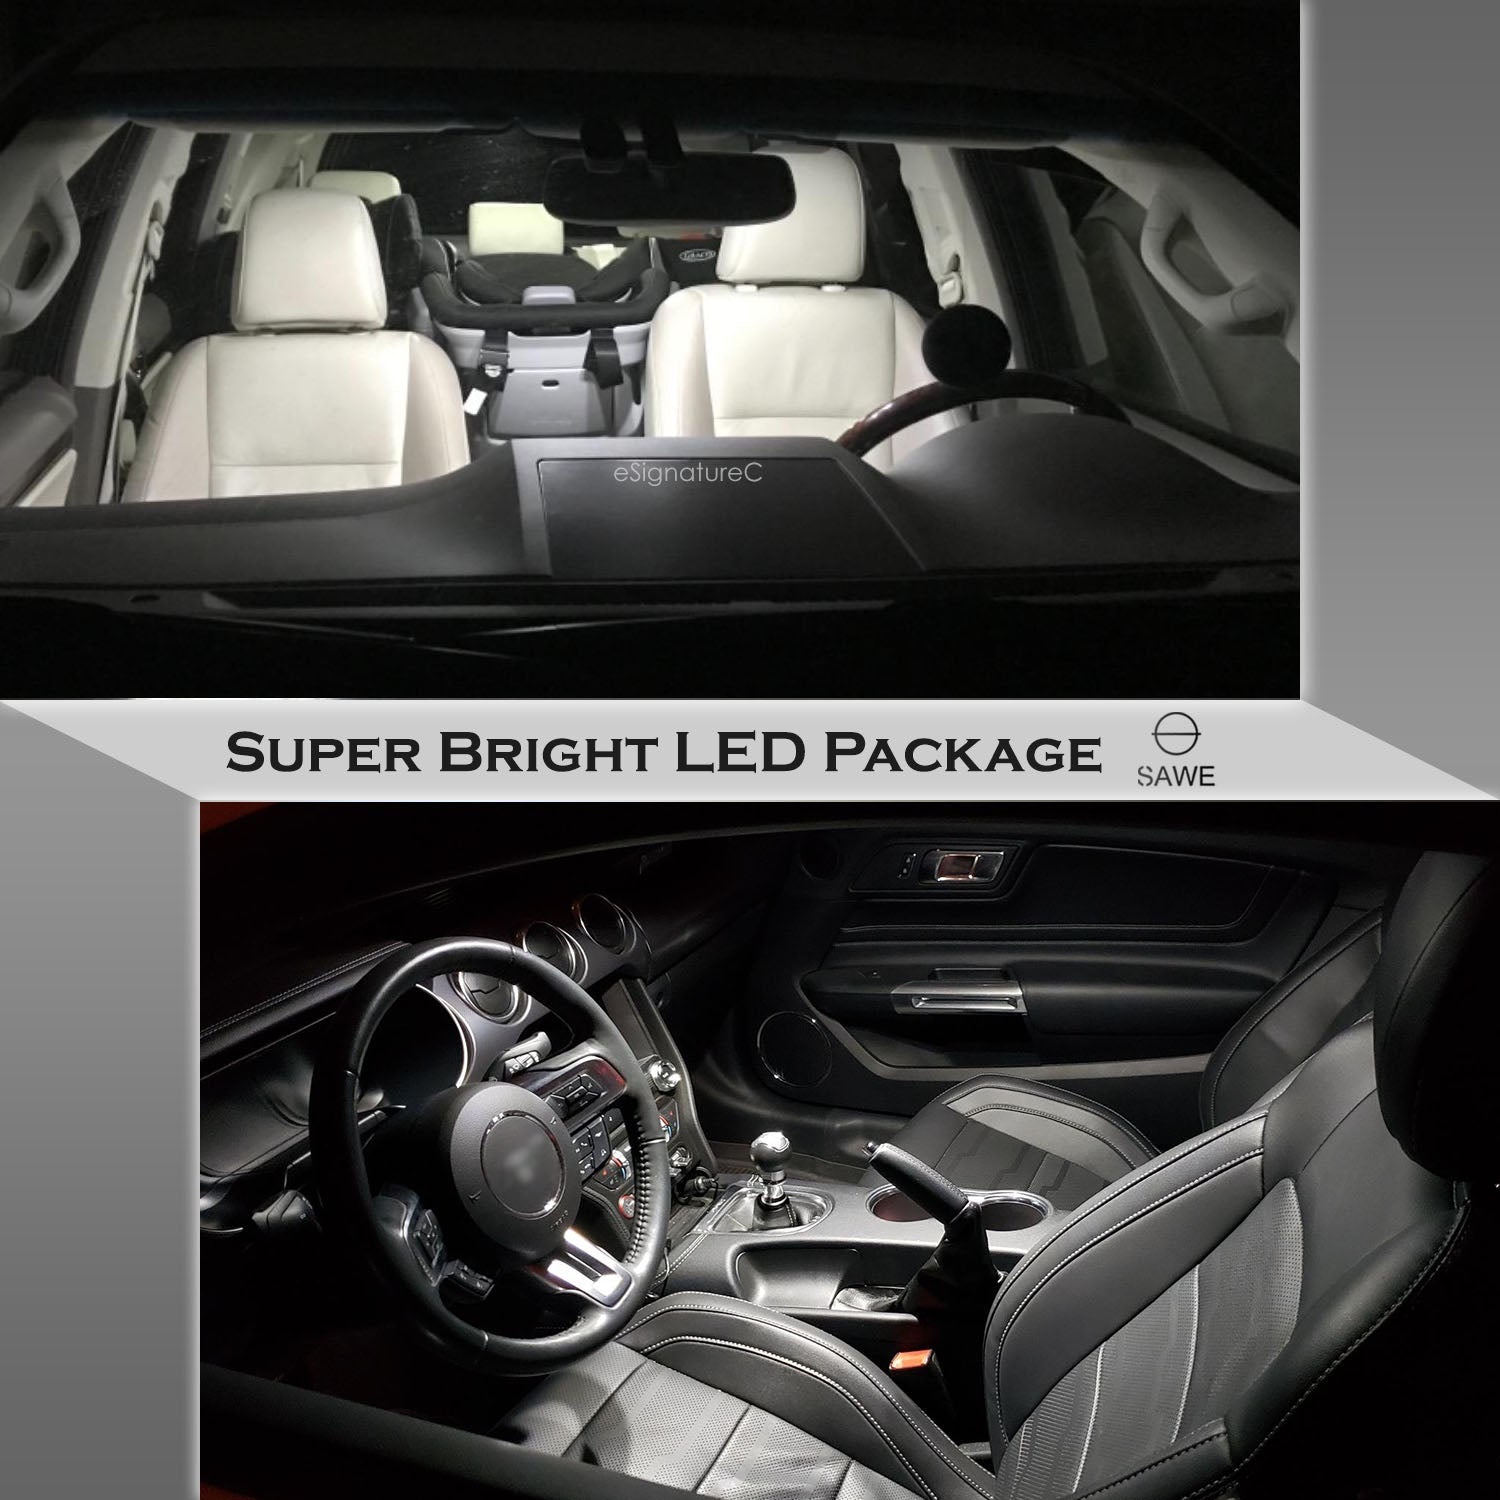 For Nissan Maxima Interior LED Lights - Dome & Map Light Bulbs Package Kit for 2004 - 2008 - White